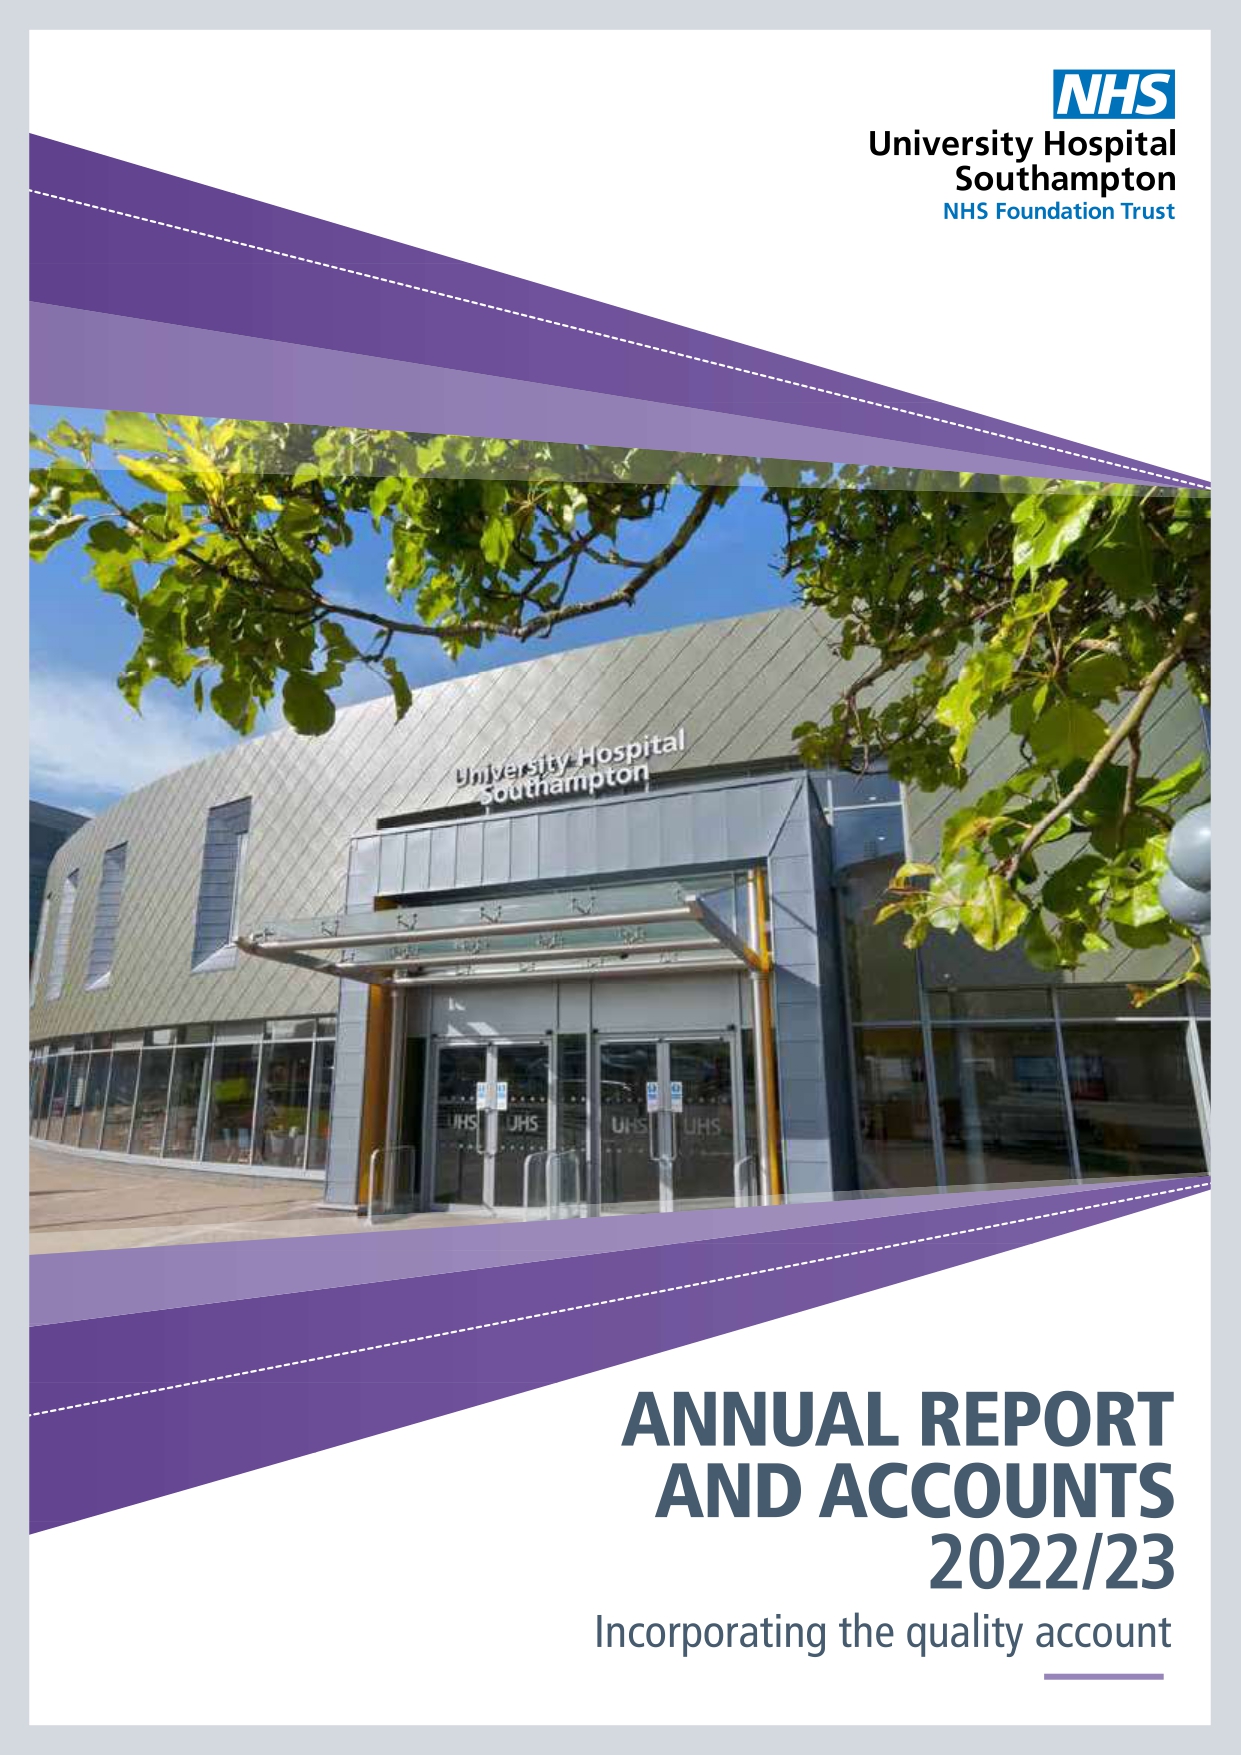 Annual report and accounts 2022/23 front cover